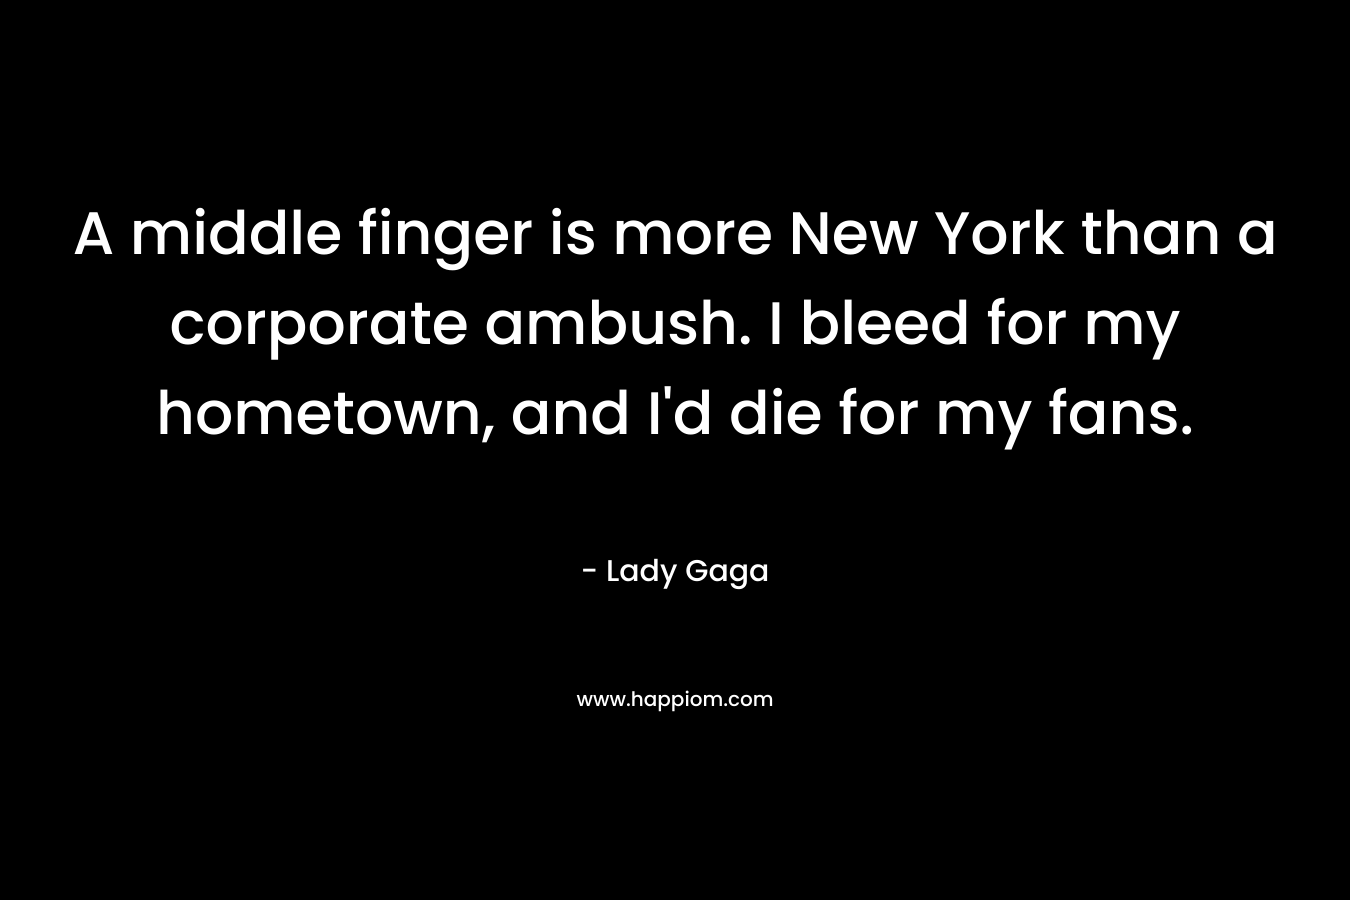 A middle finger is more New York than a corporate ambush. I bleed for my hometown, and I'd die for my fans.